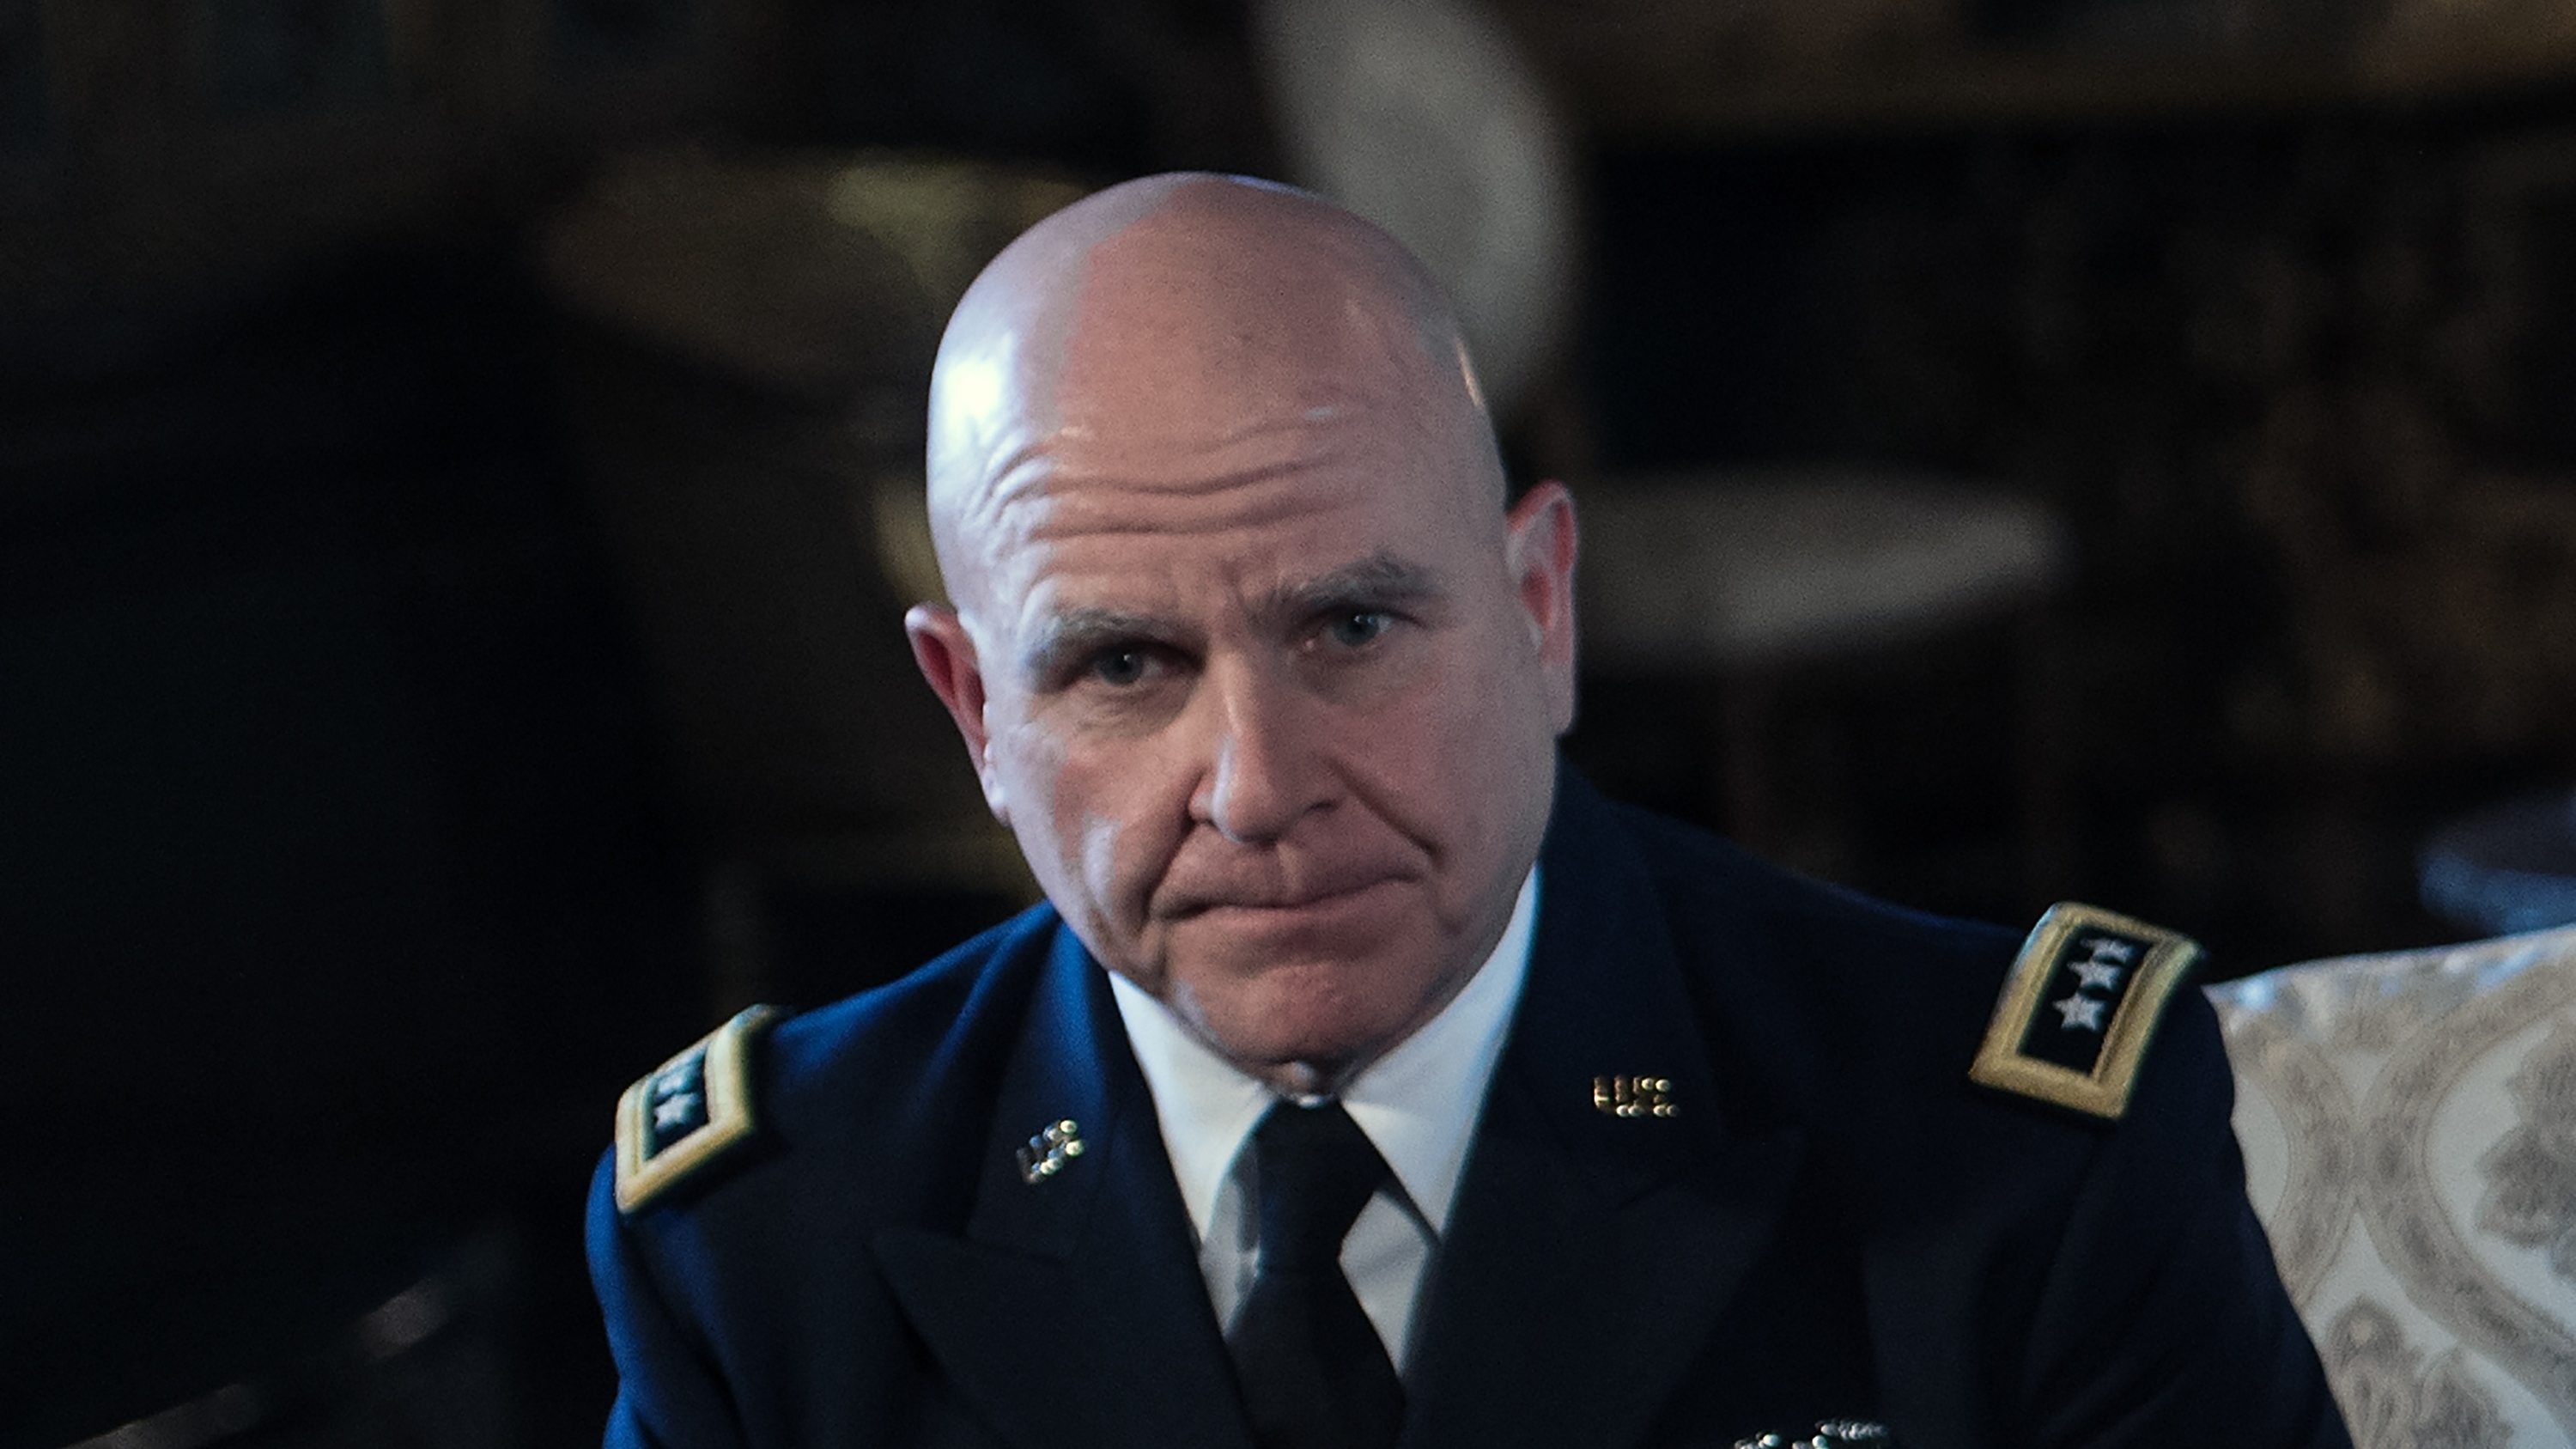 Army Lt. Gen. H.R. McMaster looks on as President Donald Trump announces him as his national security adviser at his Mar-a-Lago resort in Palm Beach, Fla., on February 20, 2017.